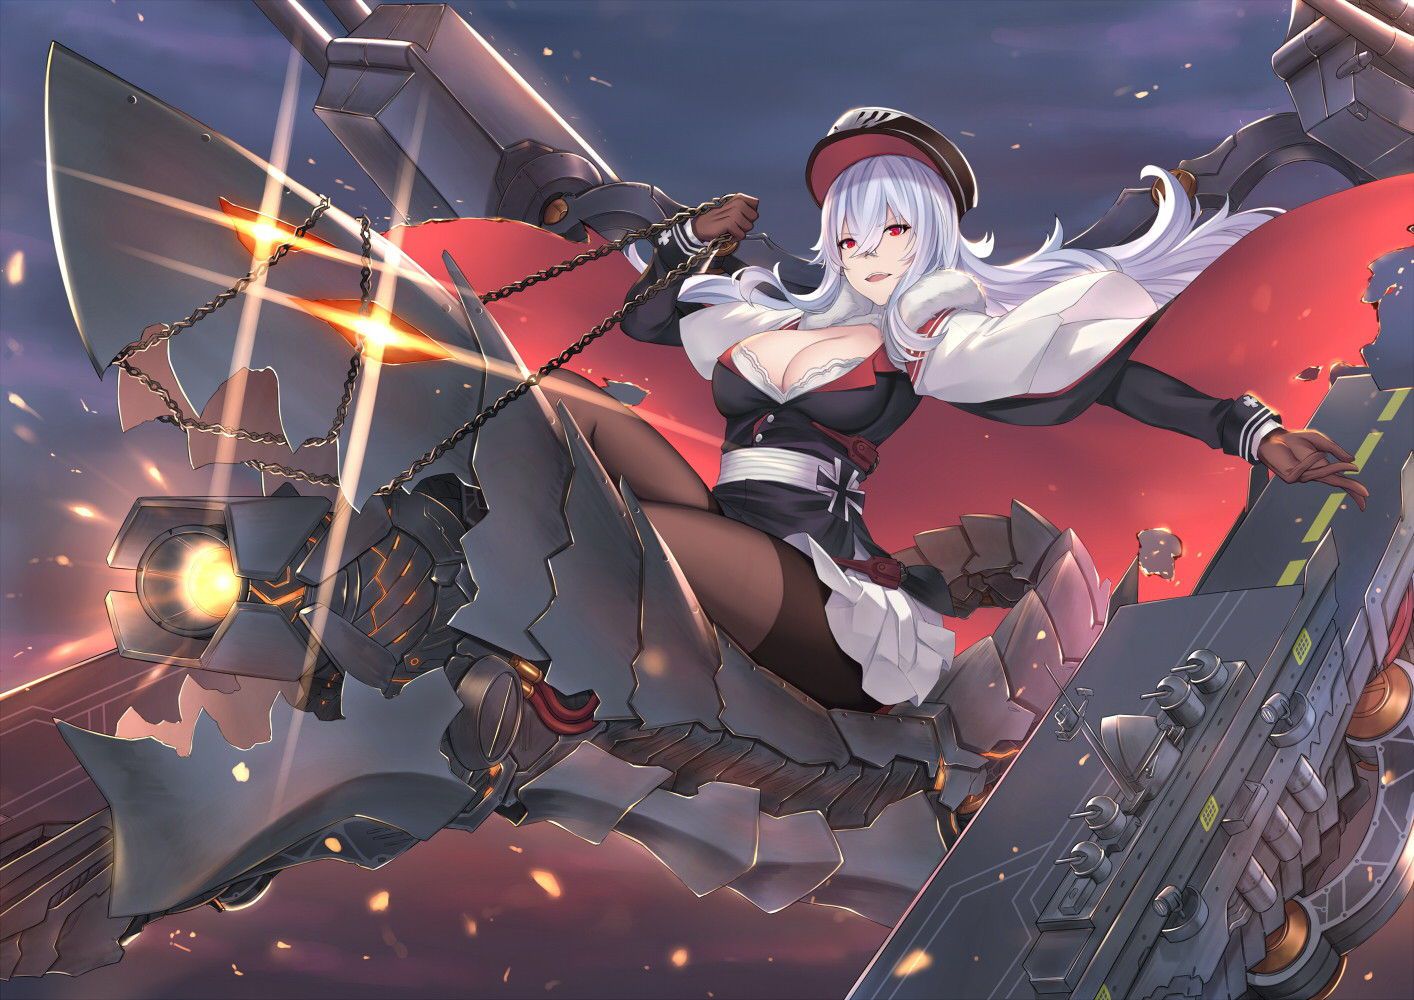 An erotic image that goes through Graf Zeppelin of Ahe face that is about to fall into pleasure! 【Azur Lane】 8